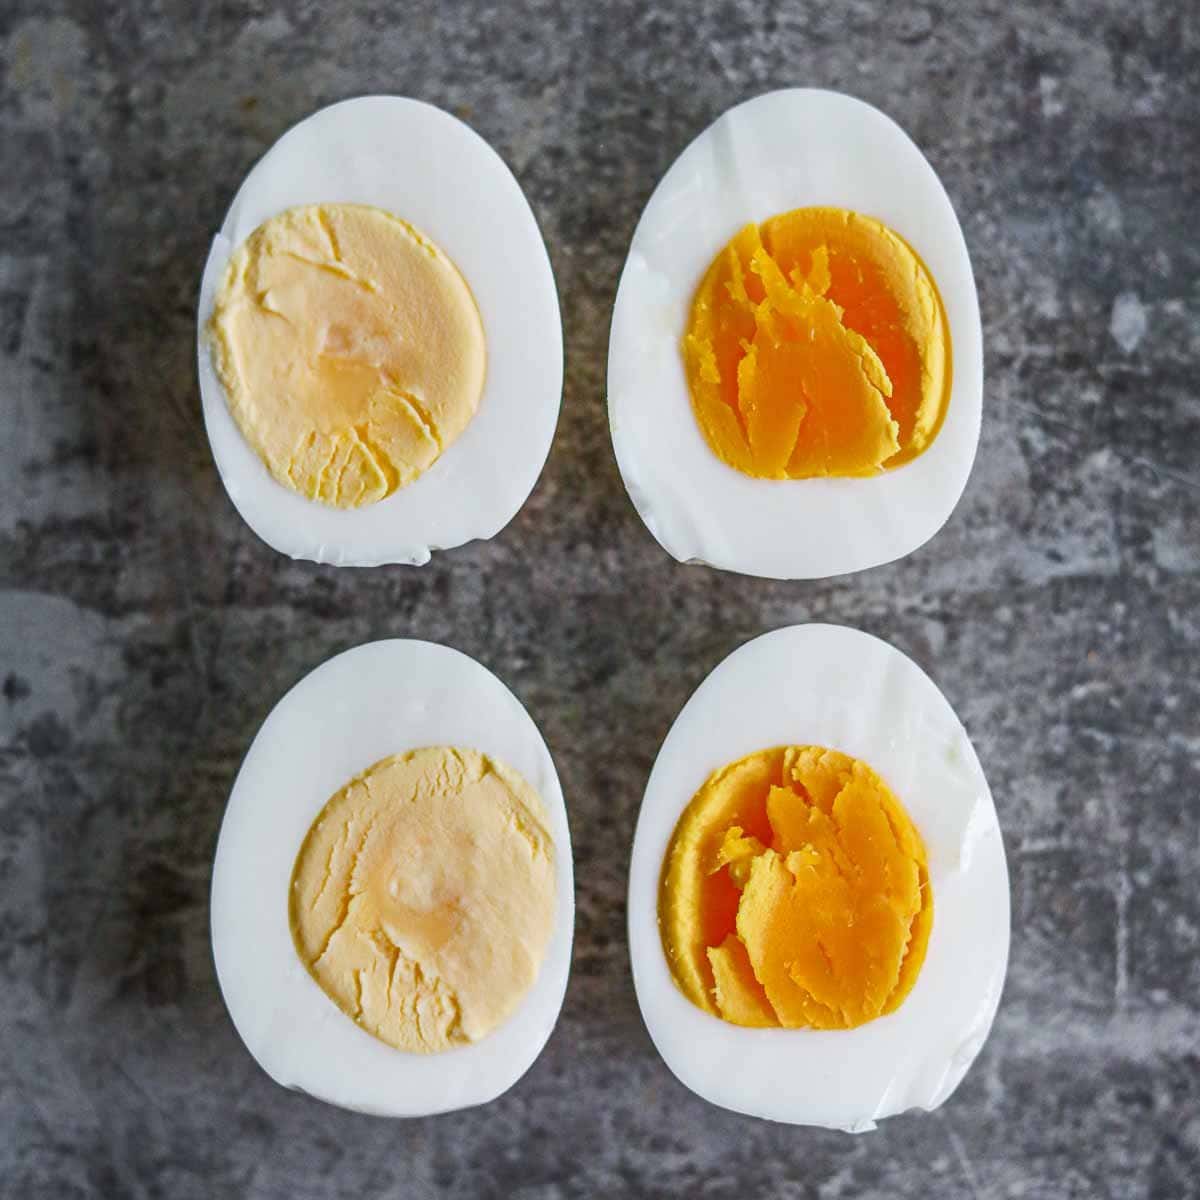 9 minute versus 12 minute perfect fool-proof hard boiled eggs with different yolks.